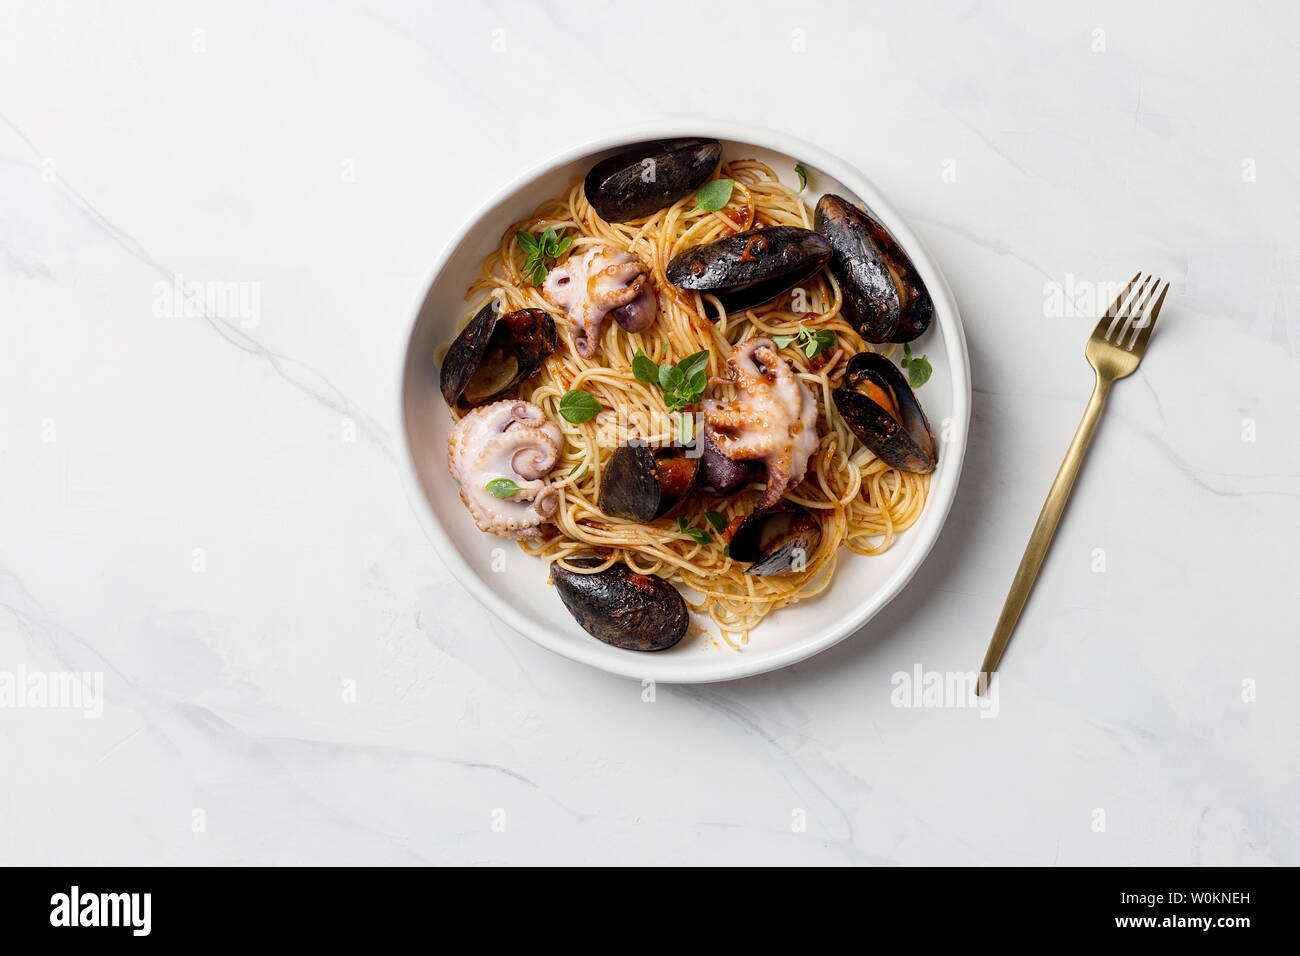 Italian pasta with mussels and octopus in white plate with golden fork on white marble background. Concept of Italian dinner Stock Photo